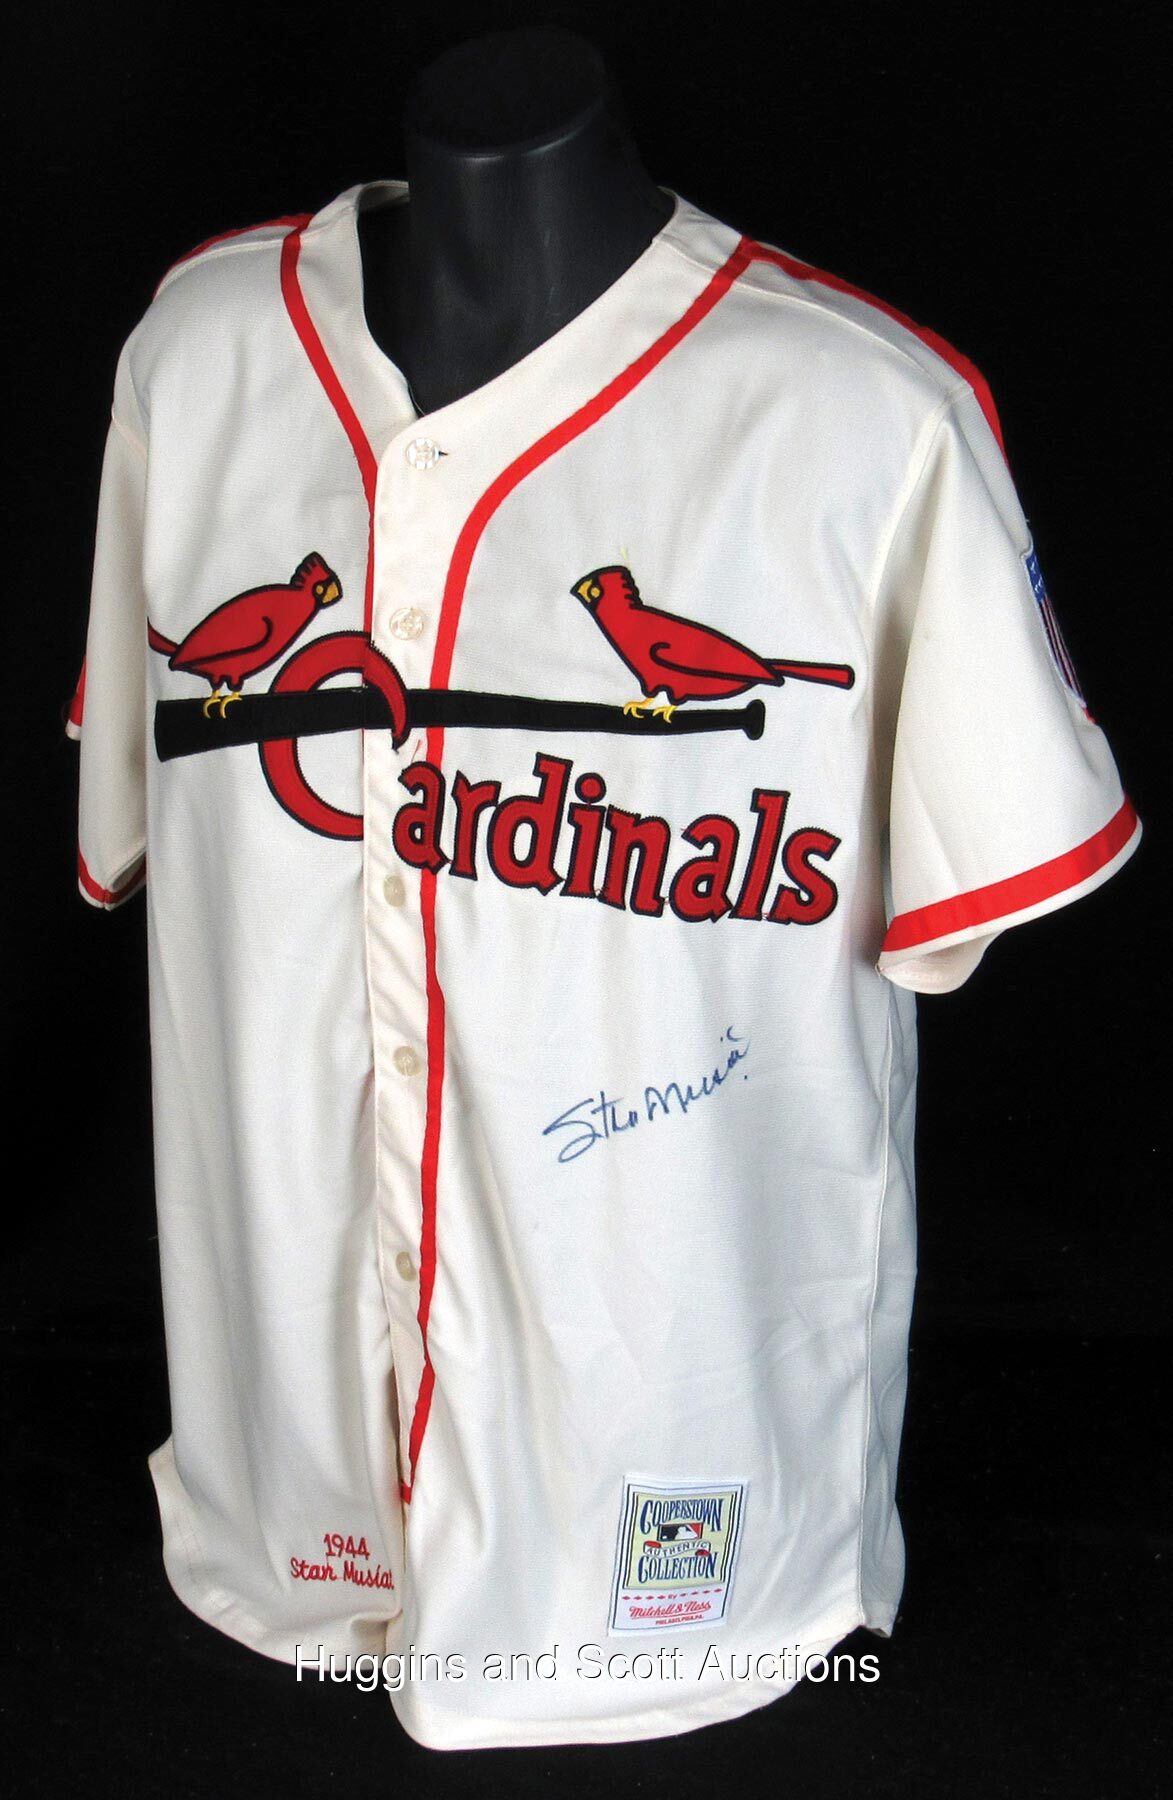 Lot - STAN MUSIAL AUTHENTIC MITCHELL & NESS JERSEY